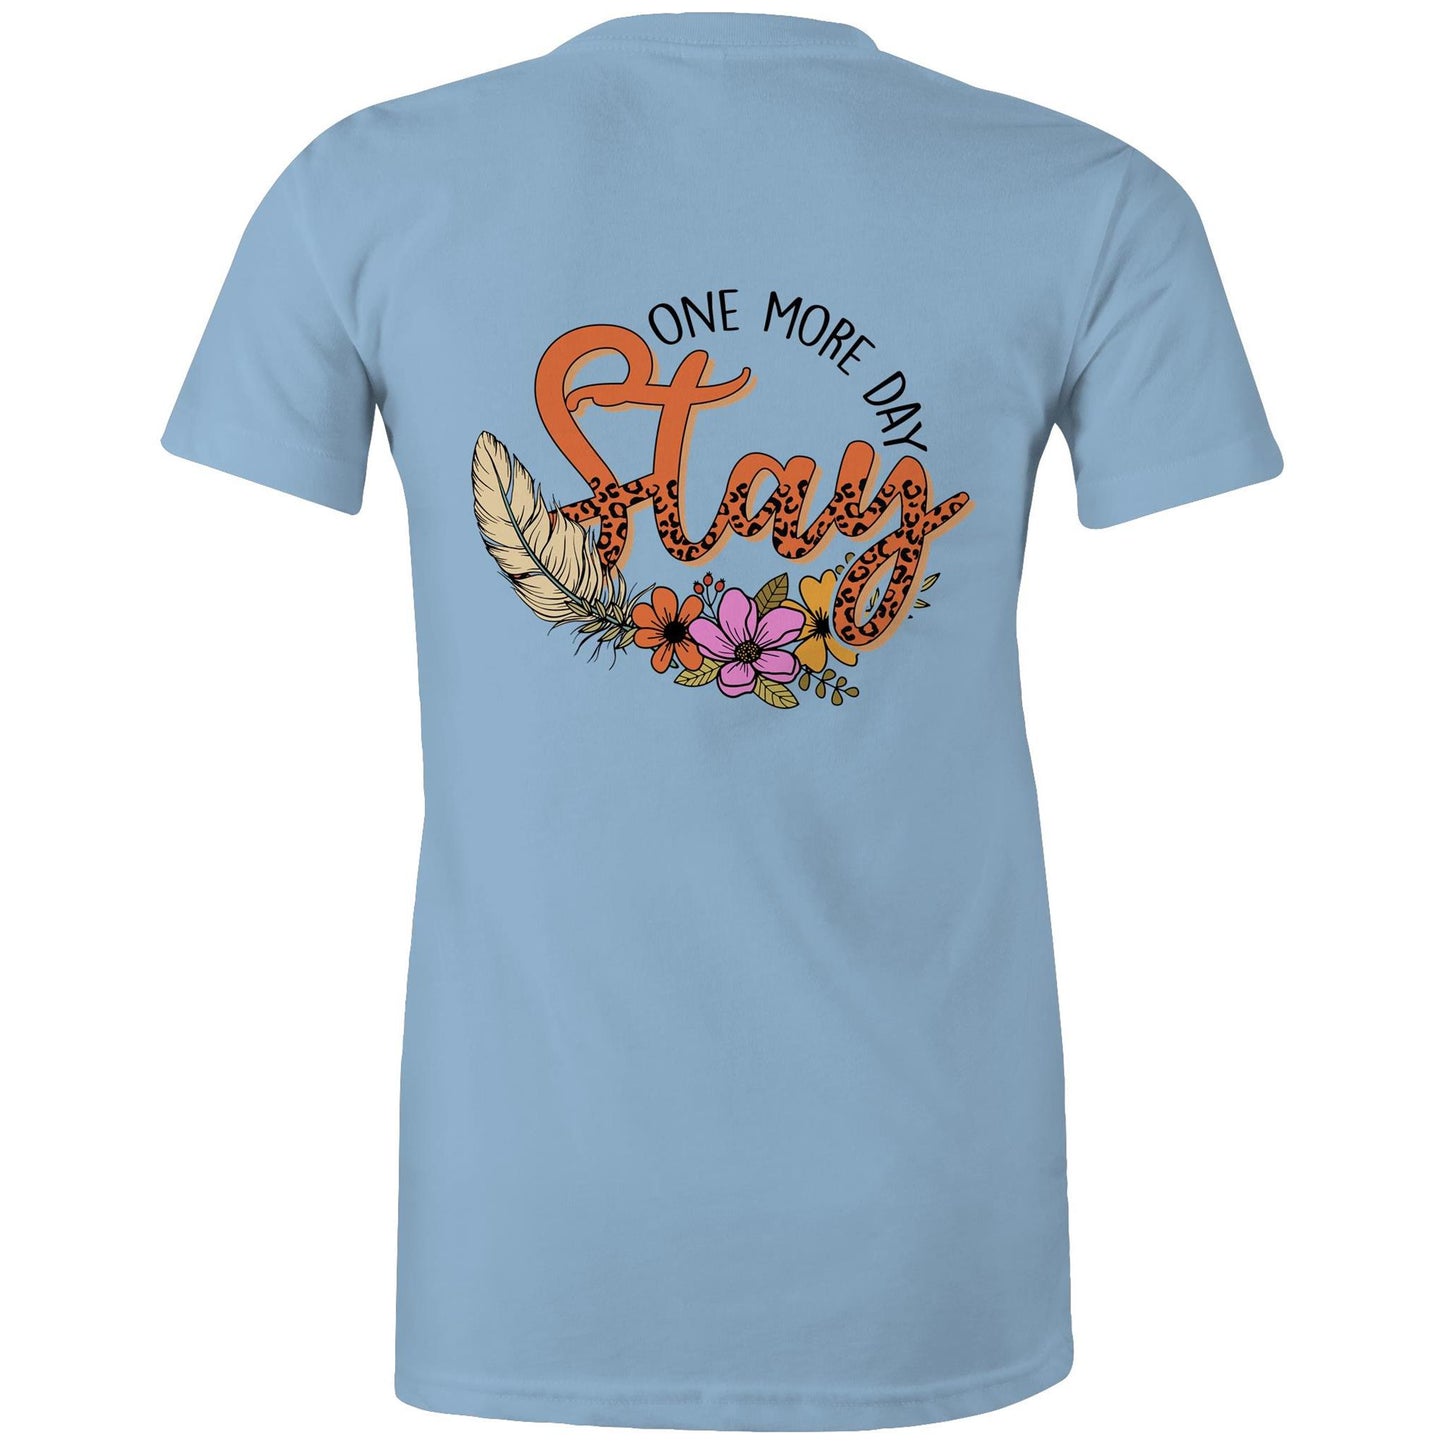 Womens Tee - Stay One More Day (Back)